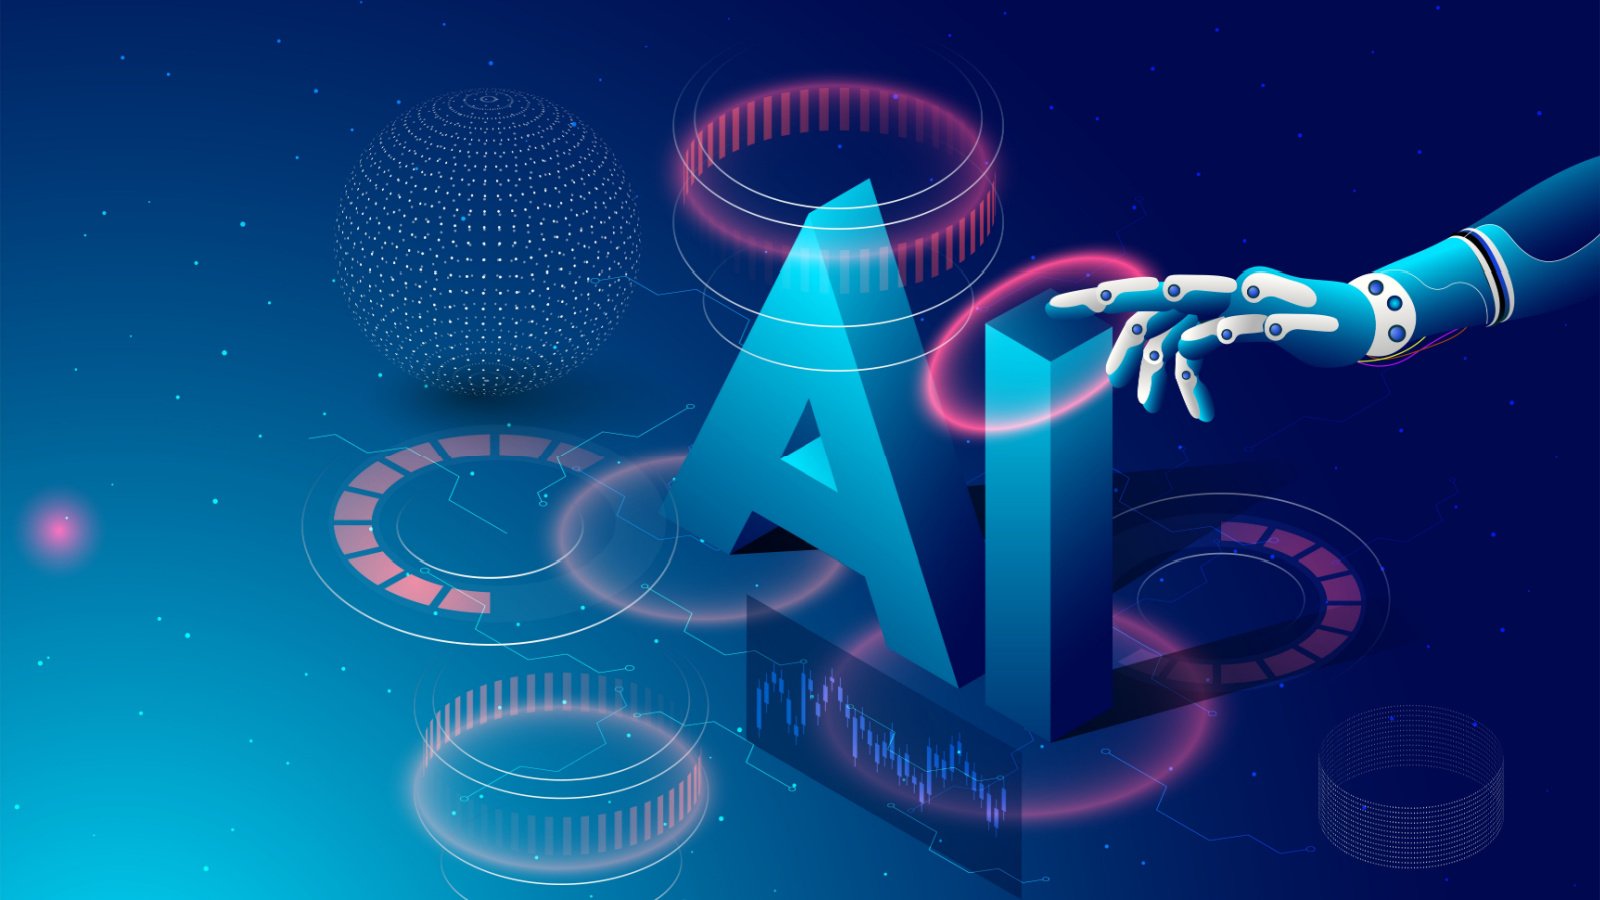 3 Stocks to Buy for the AI Revolution